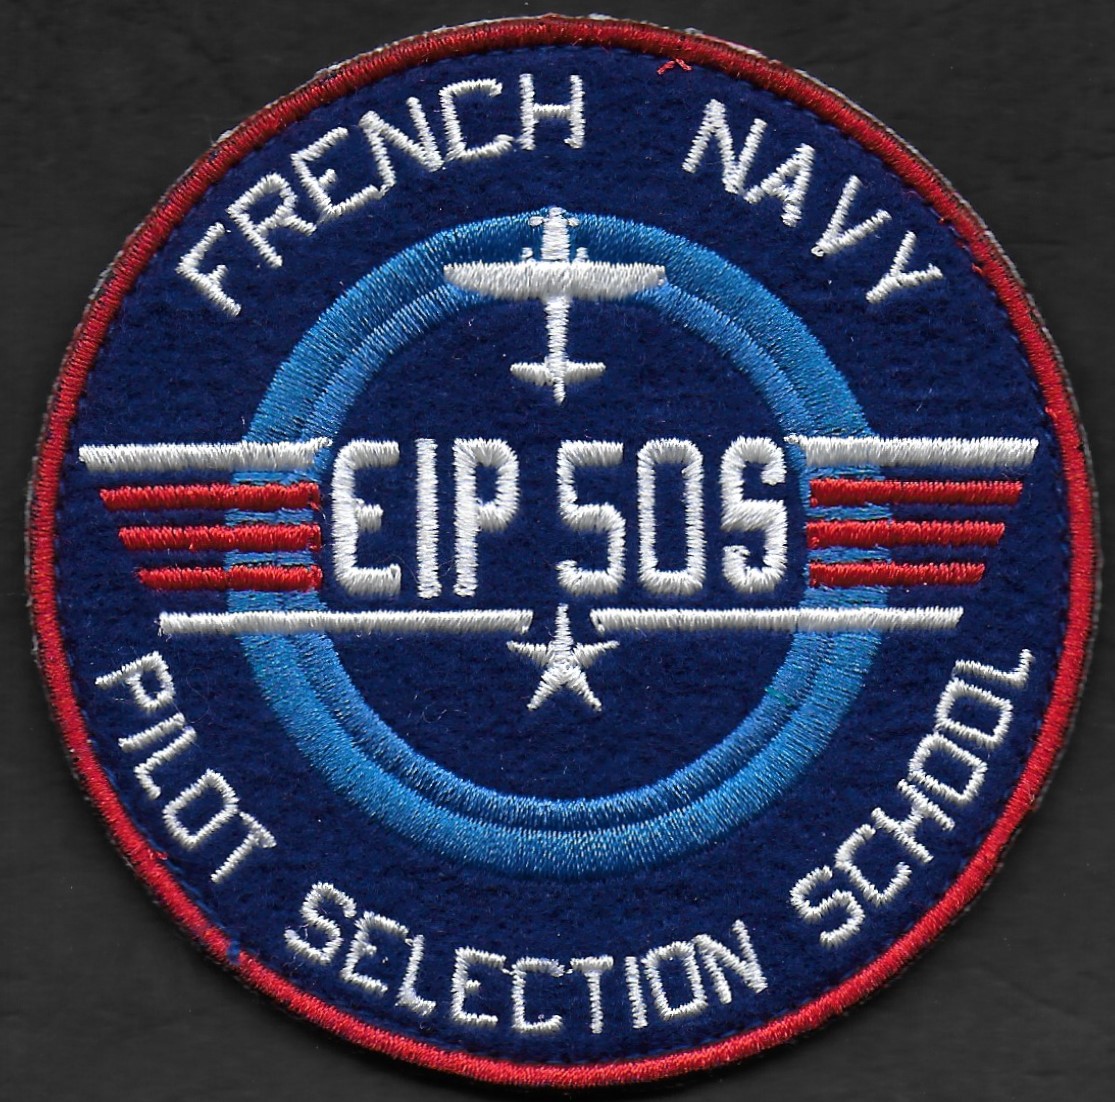 EIP 50S - French Navy - Pilot Selection School